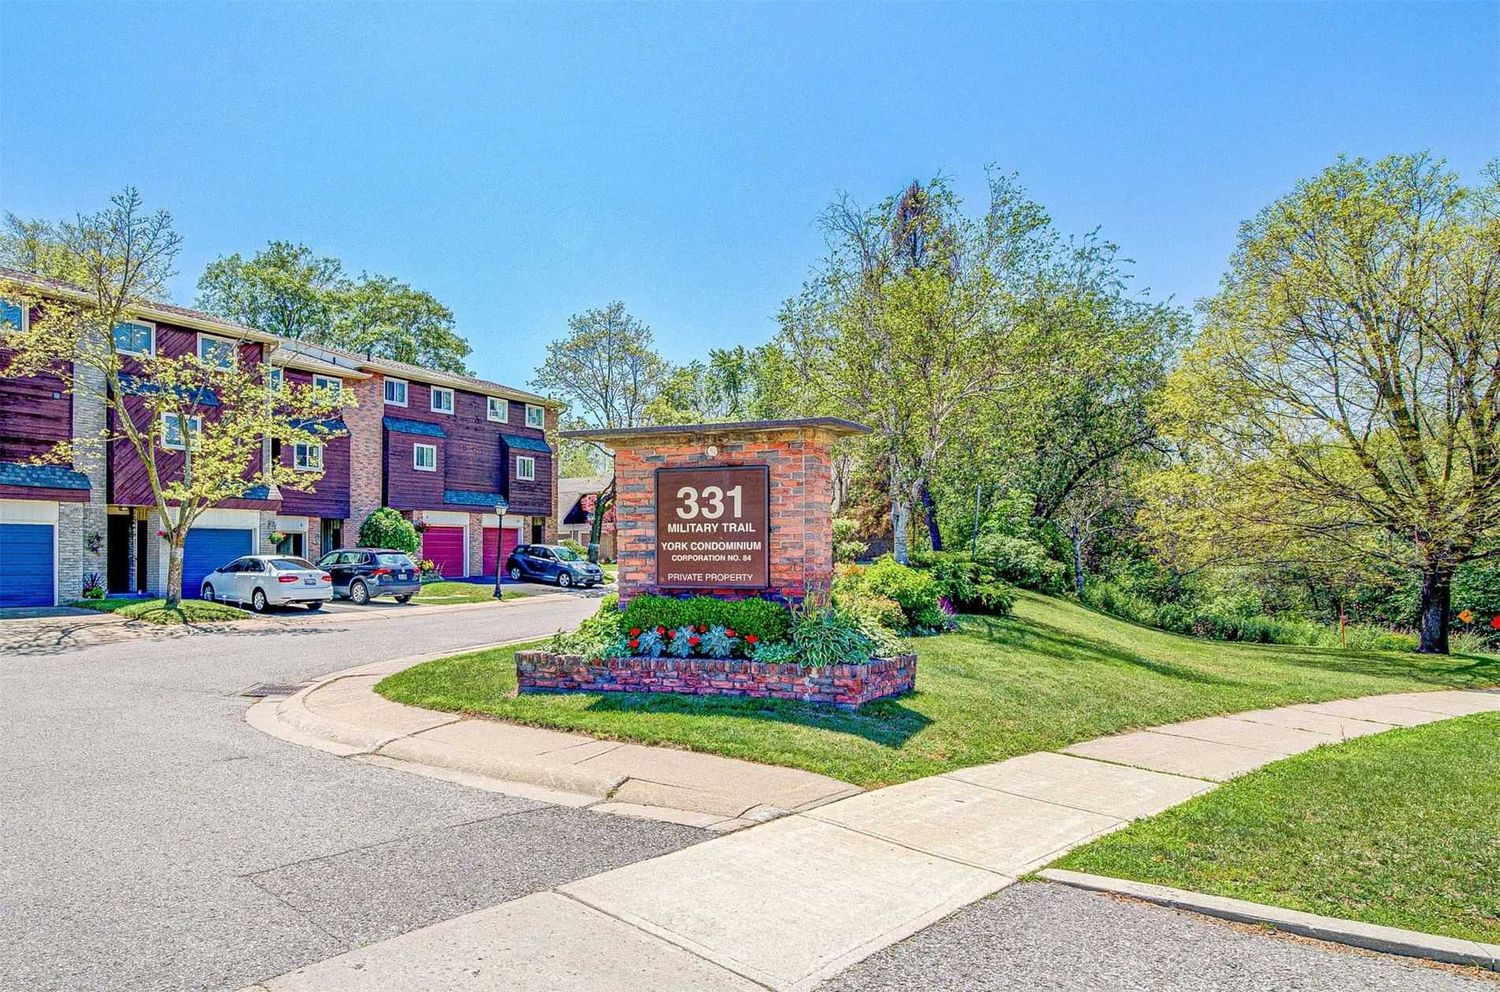 331 Military Tr. 331 Military Trail Townhomes is located in  Scarborough, Toronto - image #1 of 2